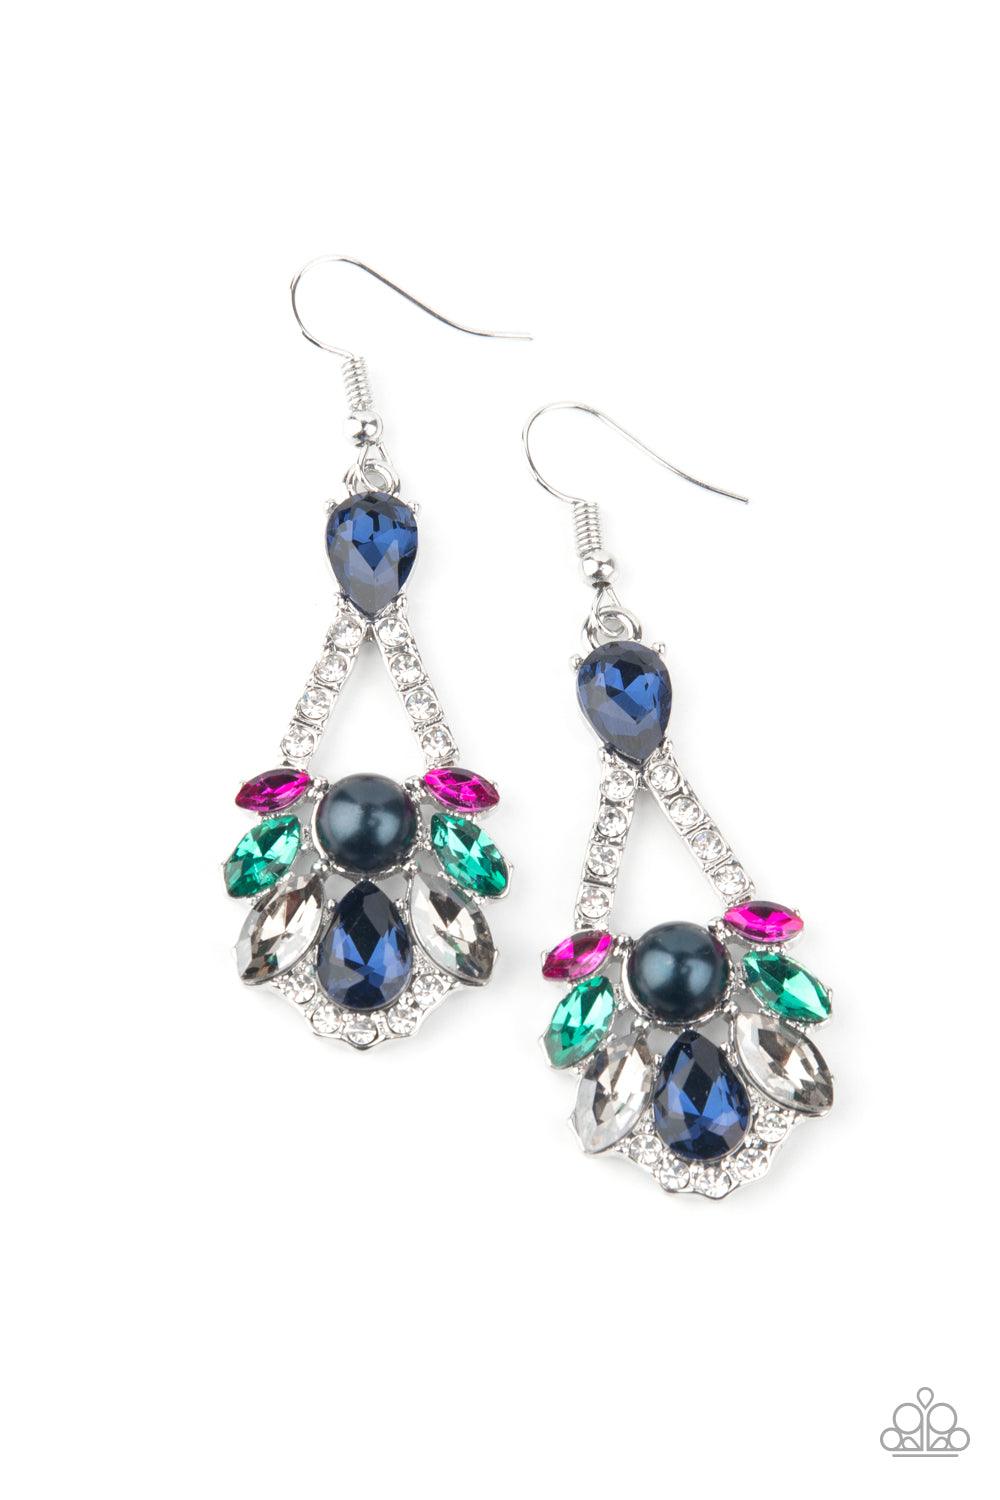 Paparazzi Accessories Prismatic Presence - Mutli A sparkly series of marquise and teardrop blue, pink, green, and smoky rhinestones embellish the front of a white rhinestone encrusted silver frame. A dainty white pearl adorns the center, adding a splash o